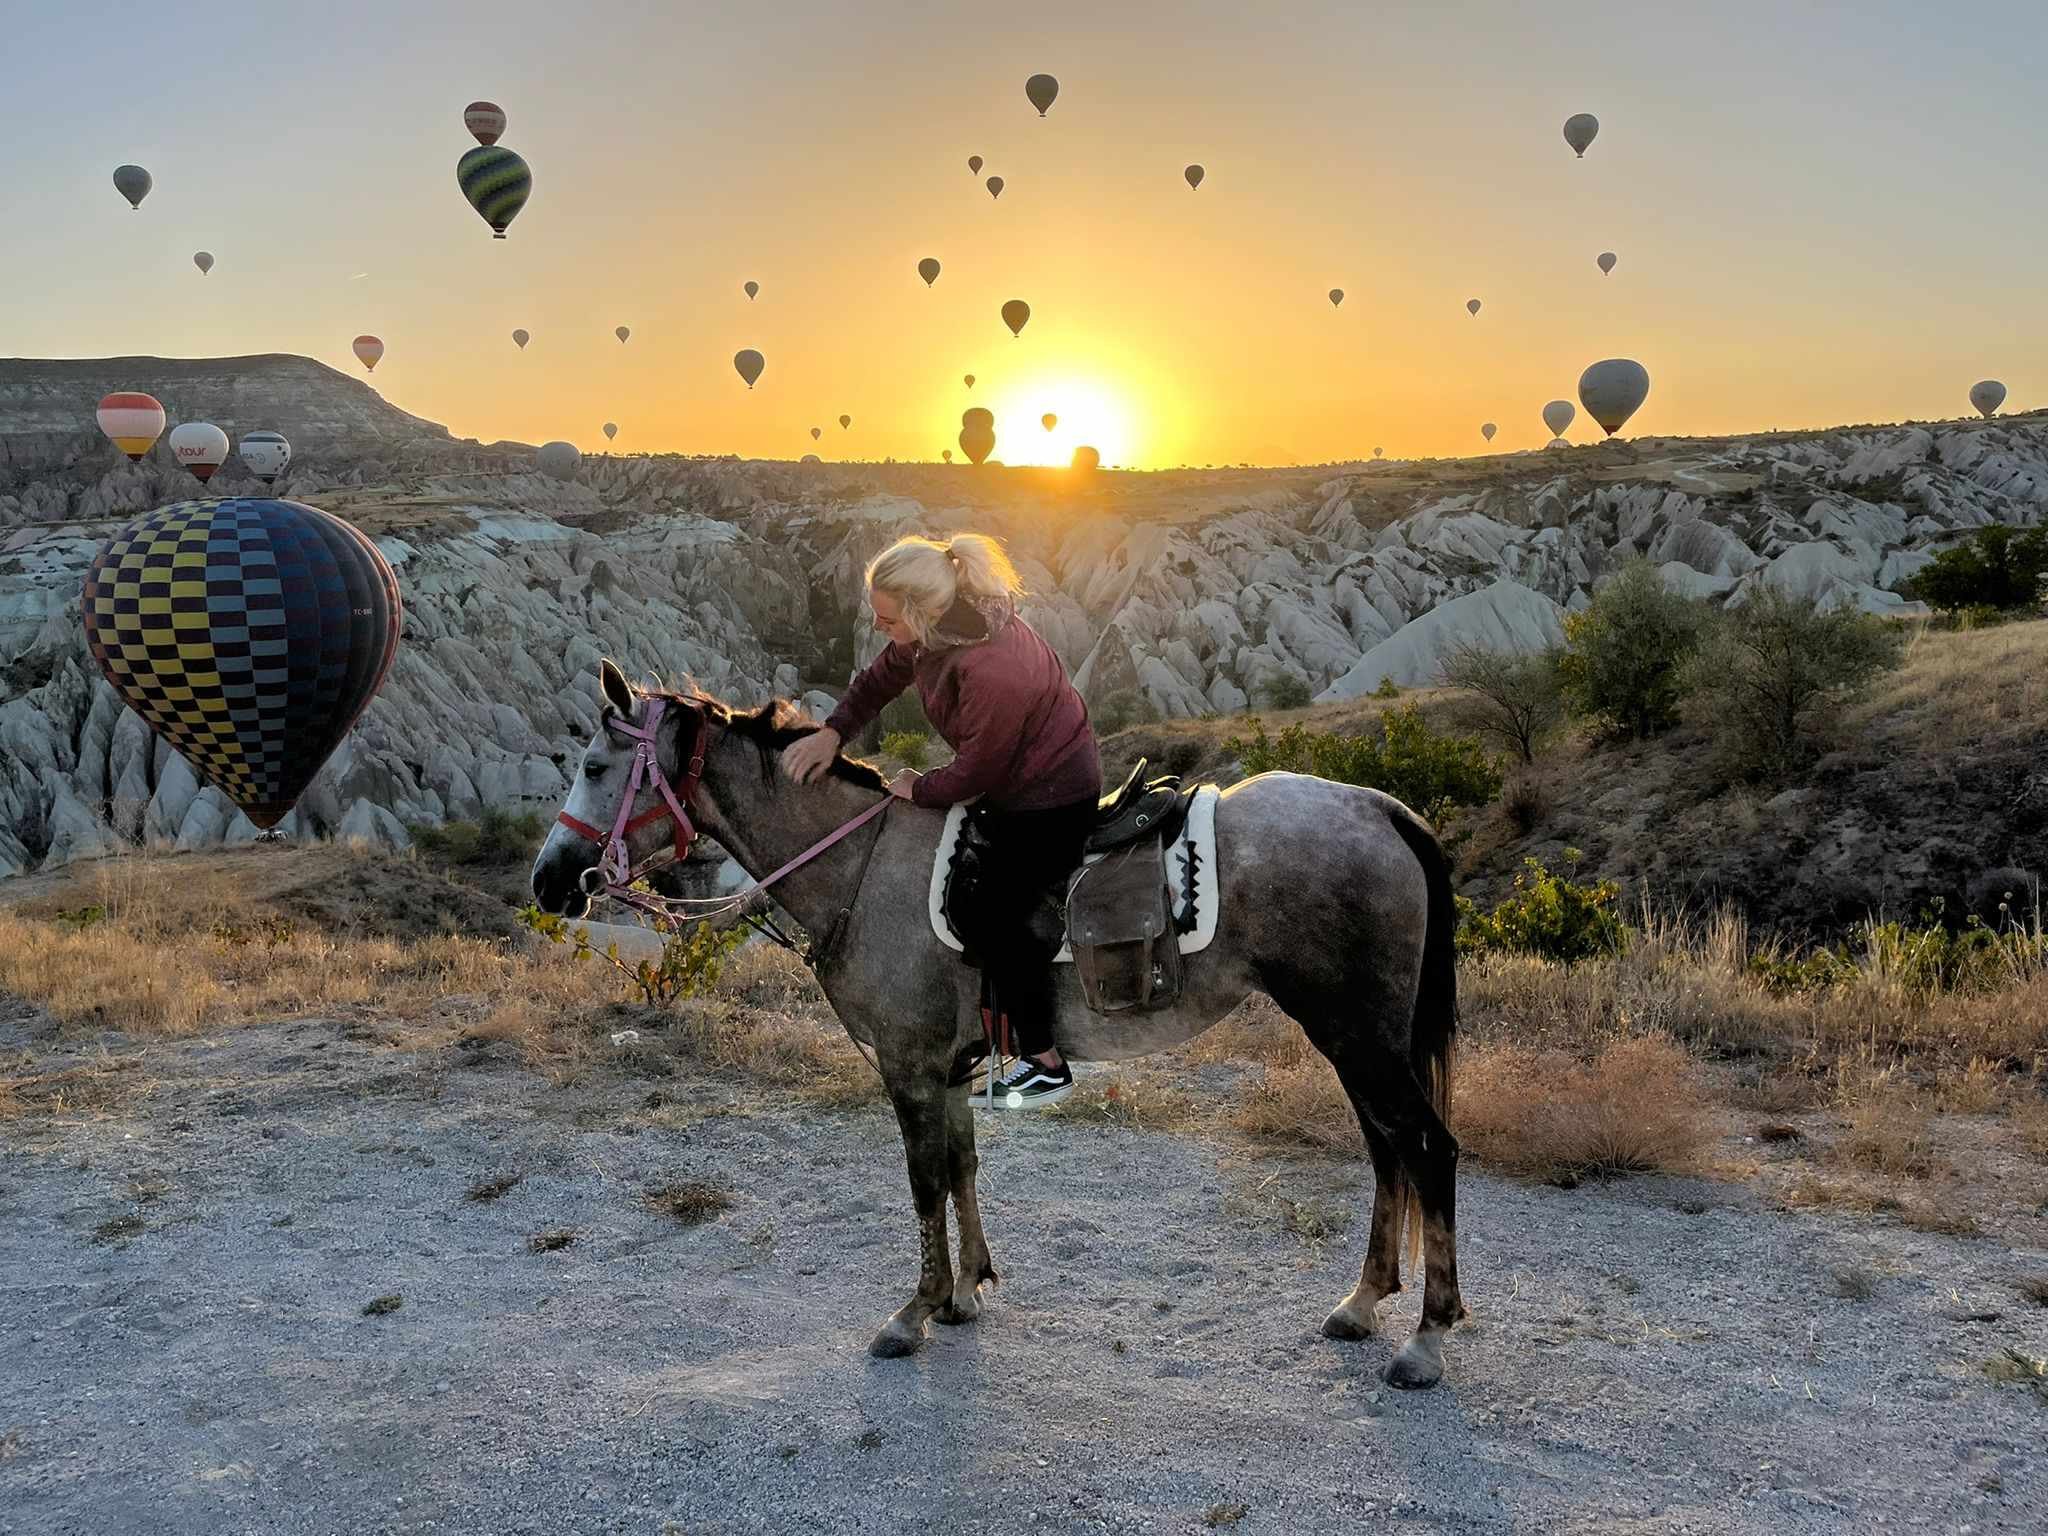 A person on a horse with another horse beside them at sunrise, with multiple hot air balloons in the sky above a rocky landscape.